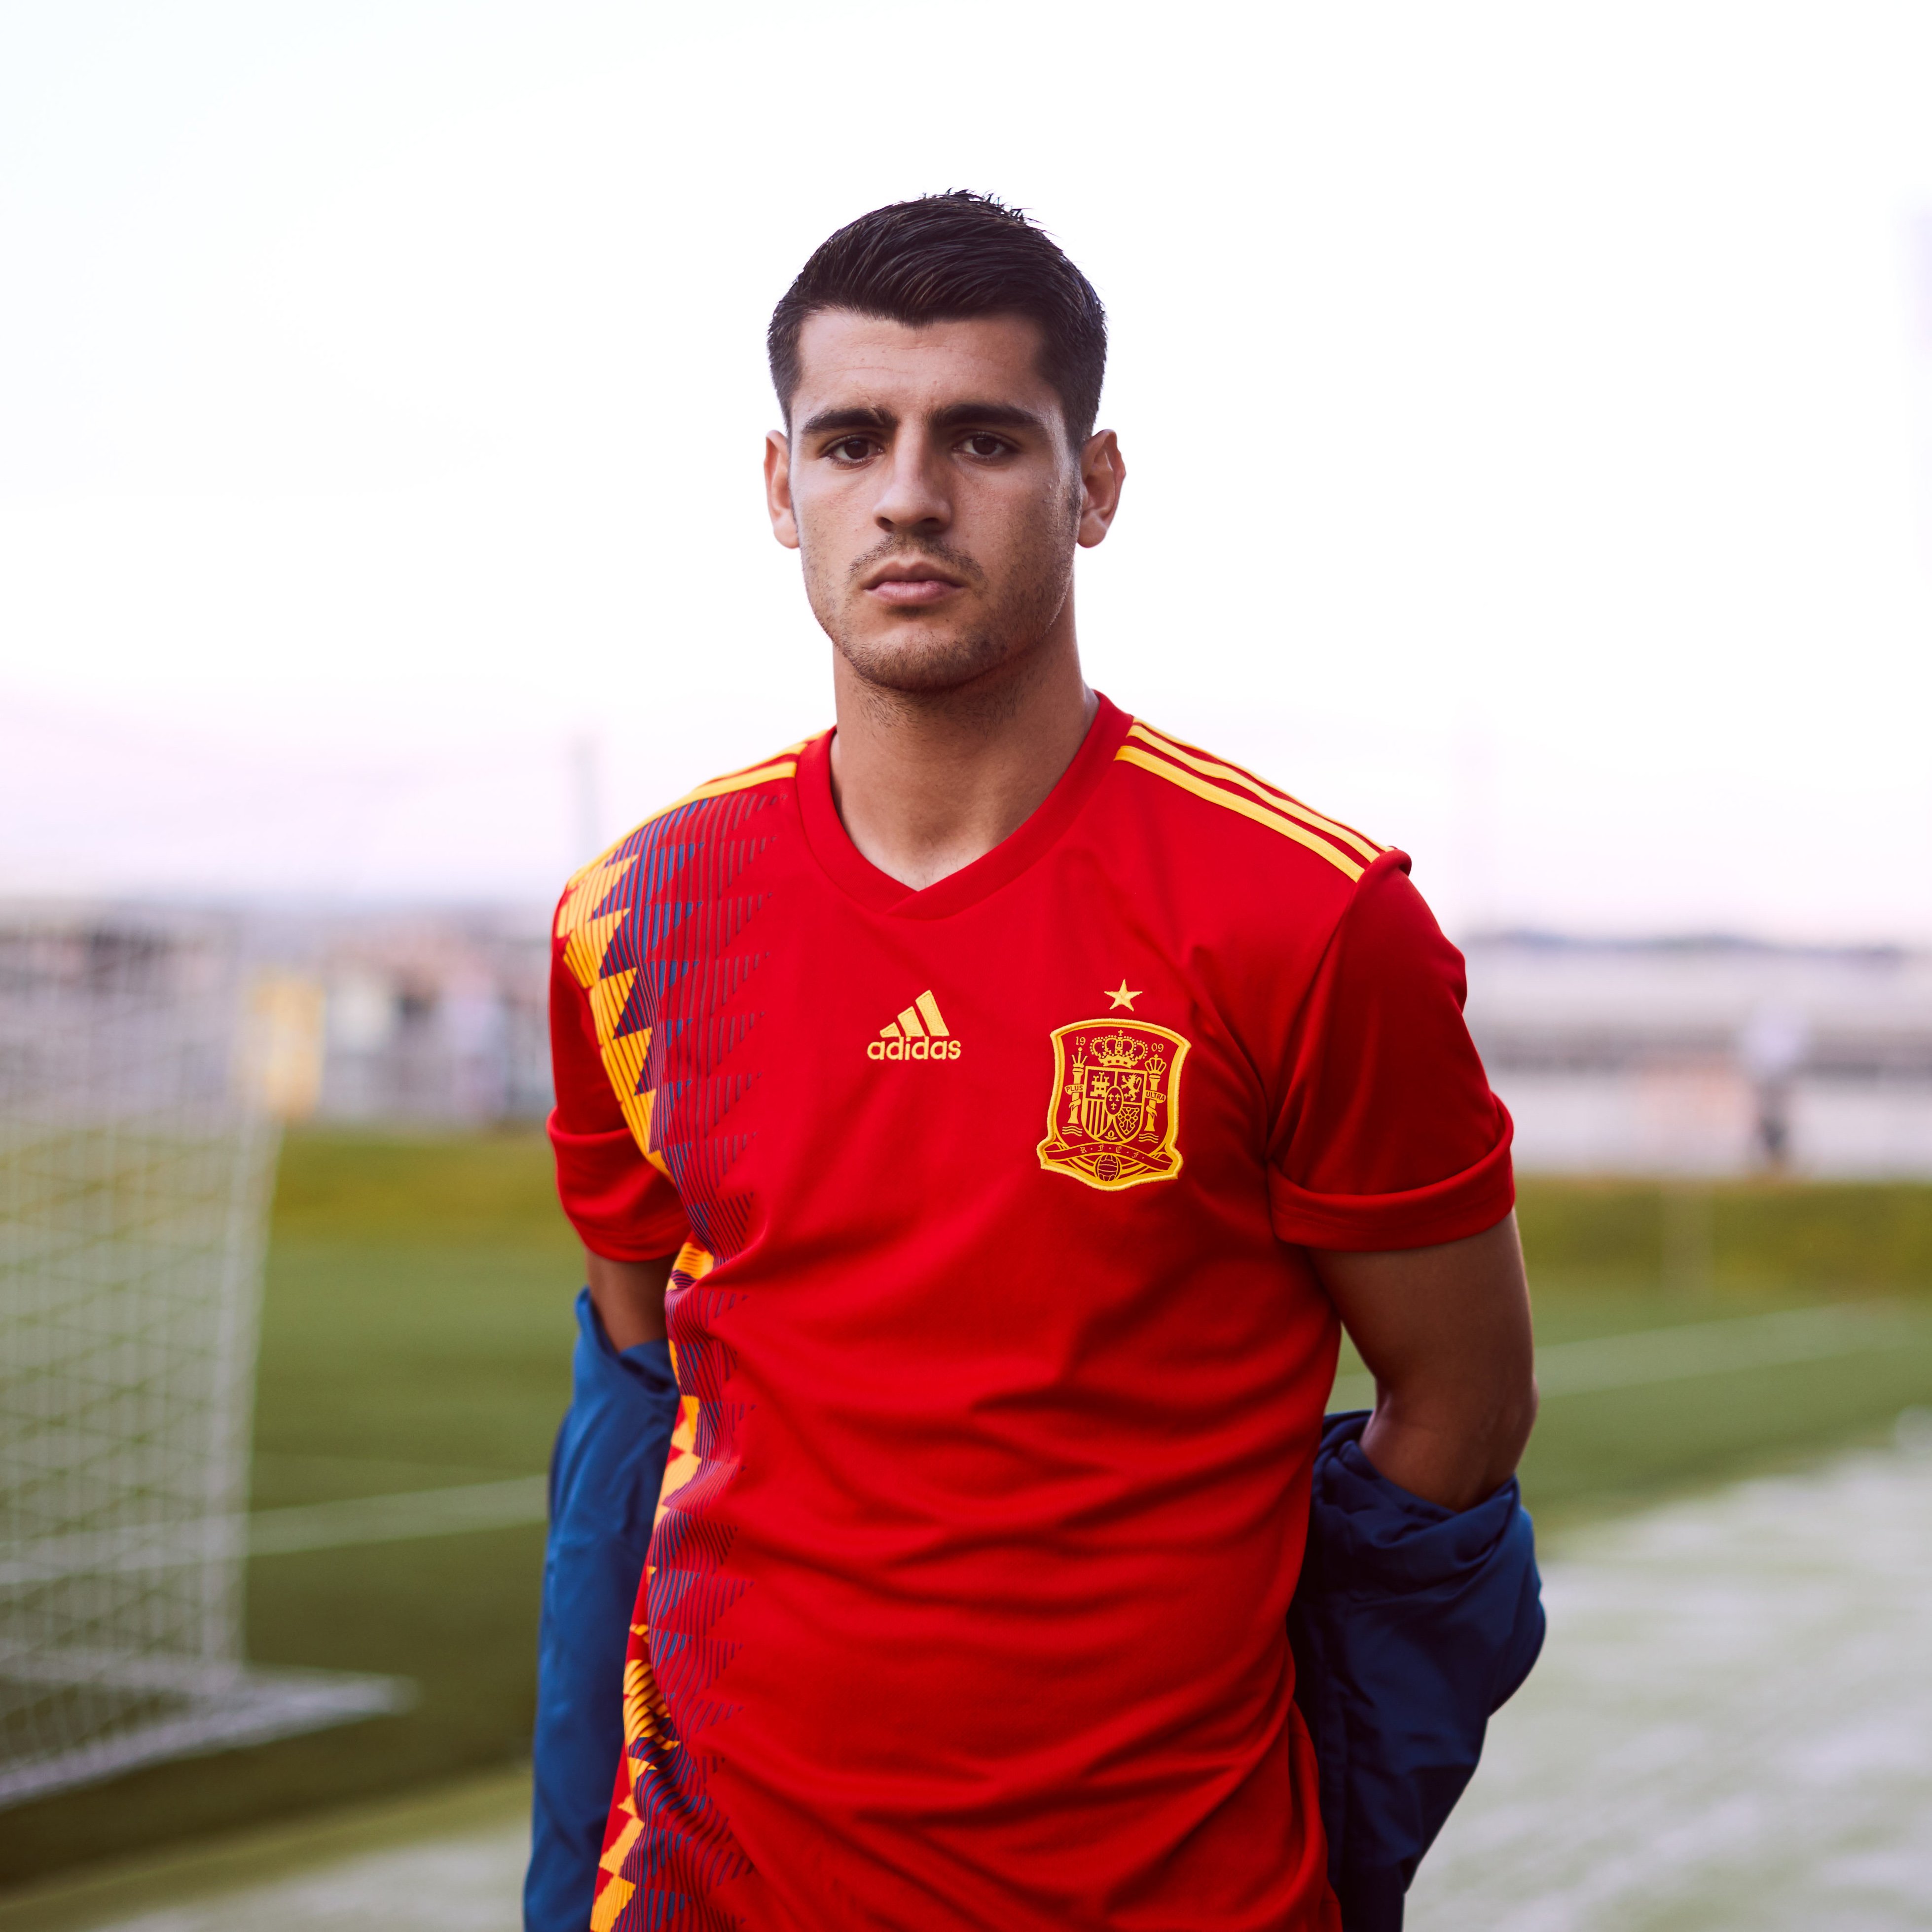 Selección Española de Fútbol on Twitter: "The road to 🏆 begins! Our 2018 FIFA World Cup Home jersey by @adidasfootball Get yours here! 👉🏻 https://t.co/d2E24cjPbW #HereToCreate https://t.co/vU5FEzOQhX" / Twitter